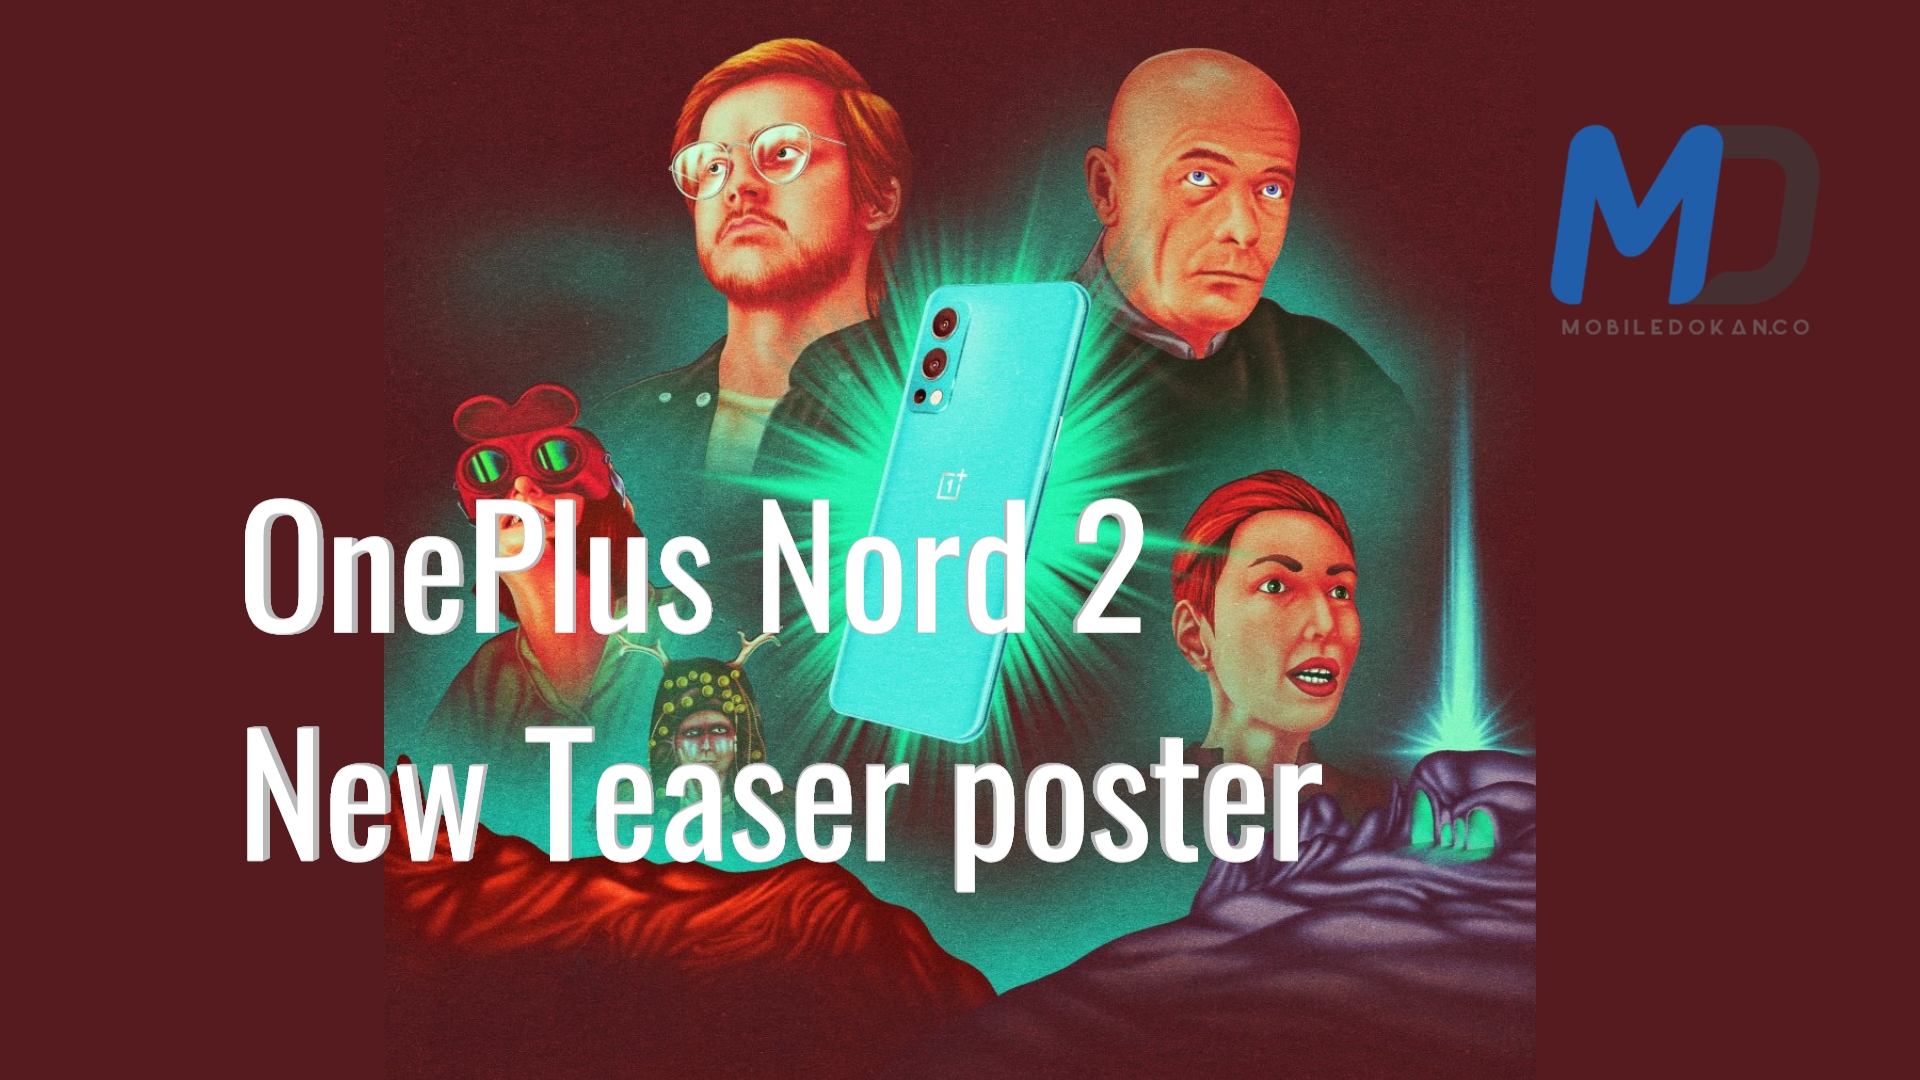 OnePlus Nord 2 poses in a new teaser poster